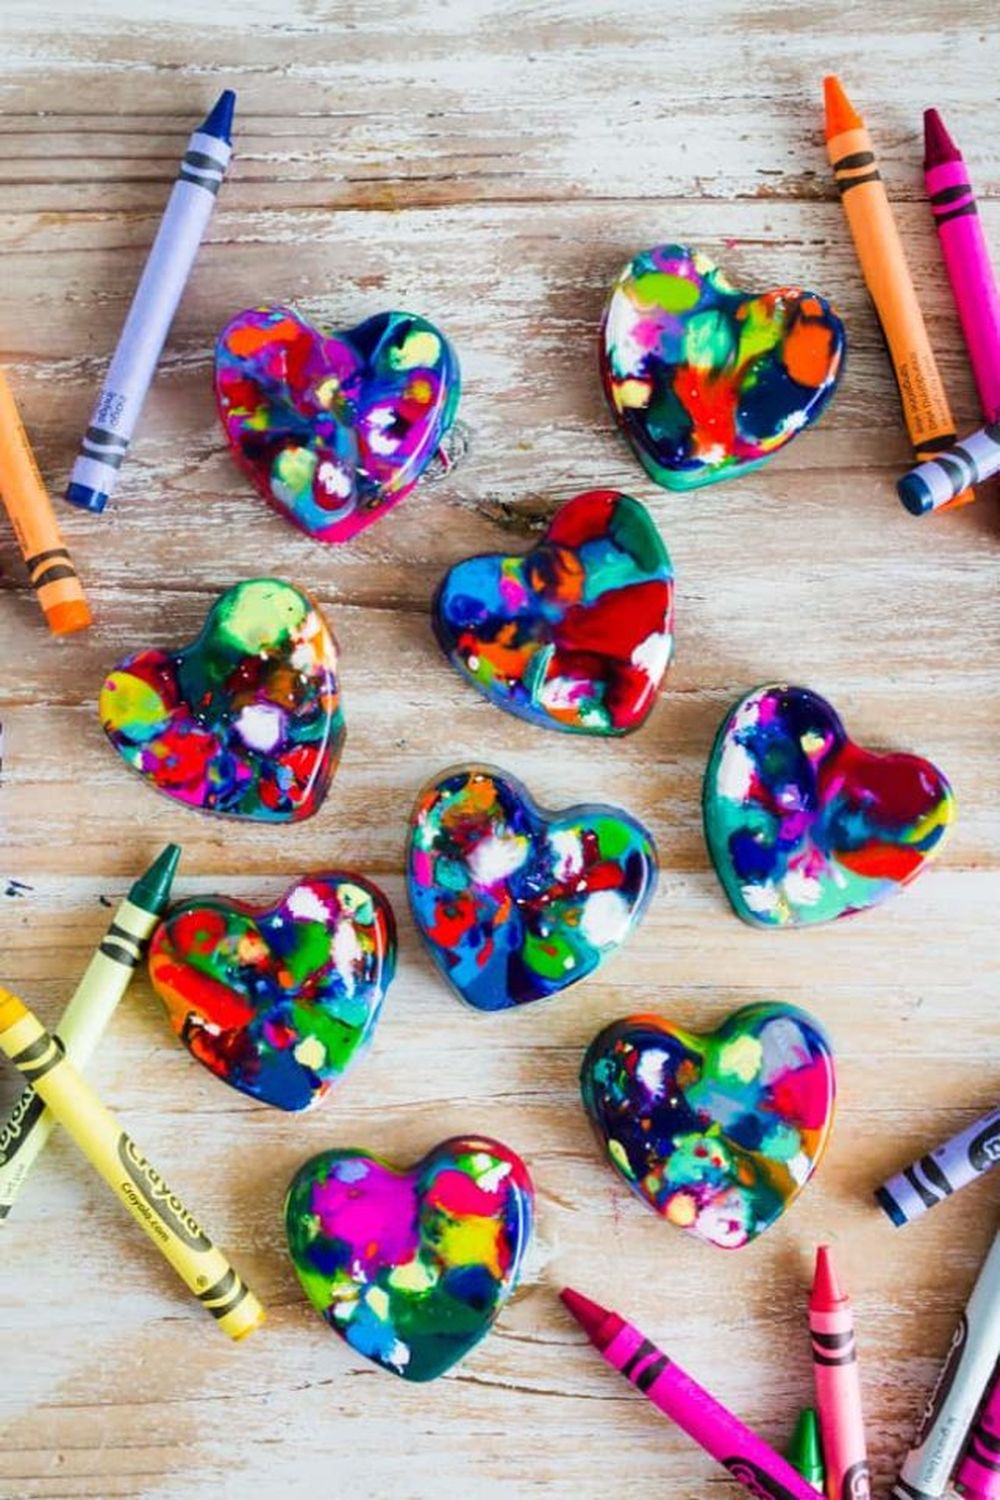 Heart shaped crayons easy valentine’s day crafts